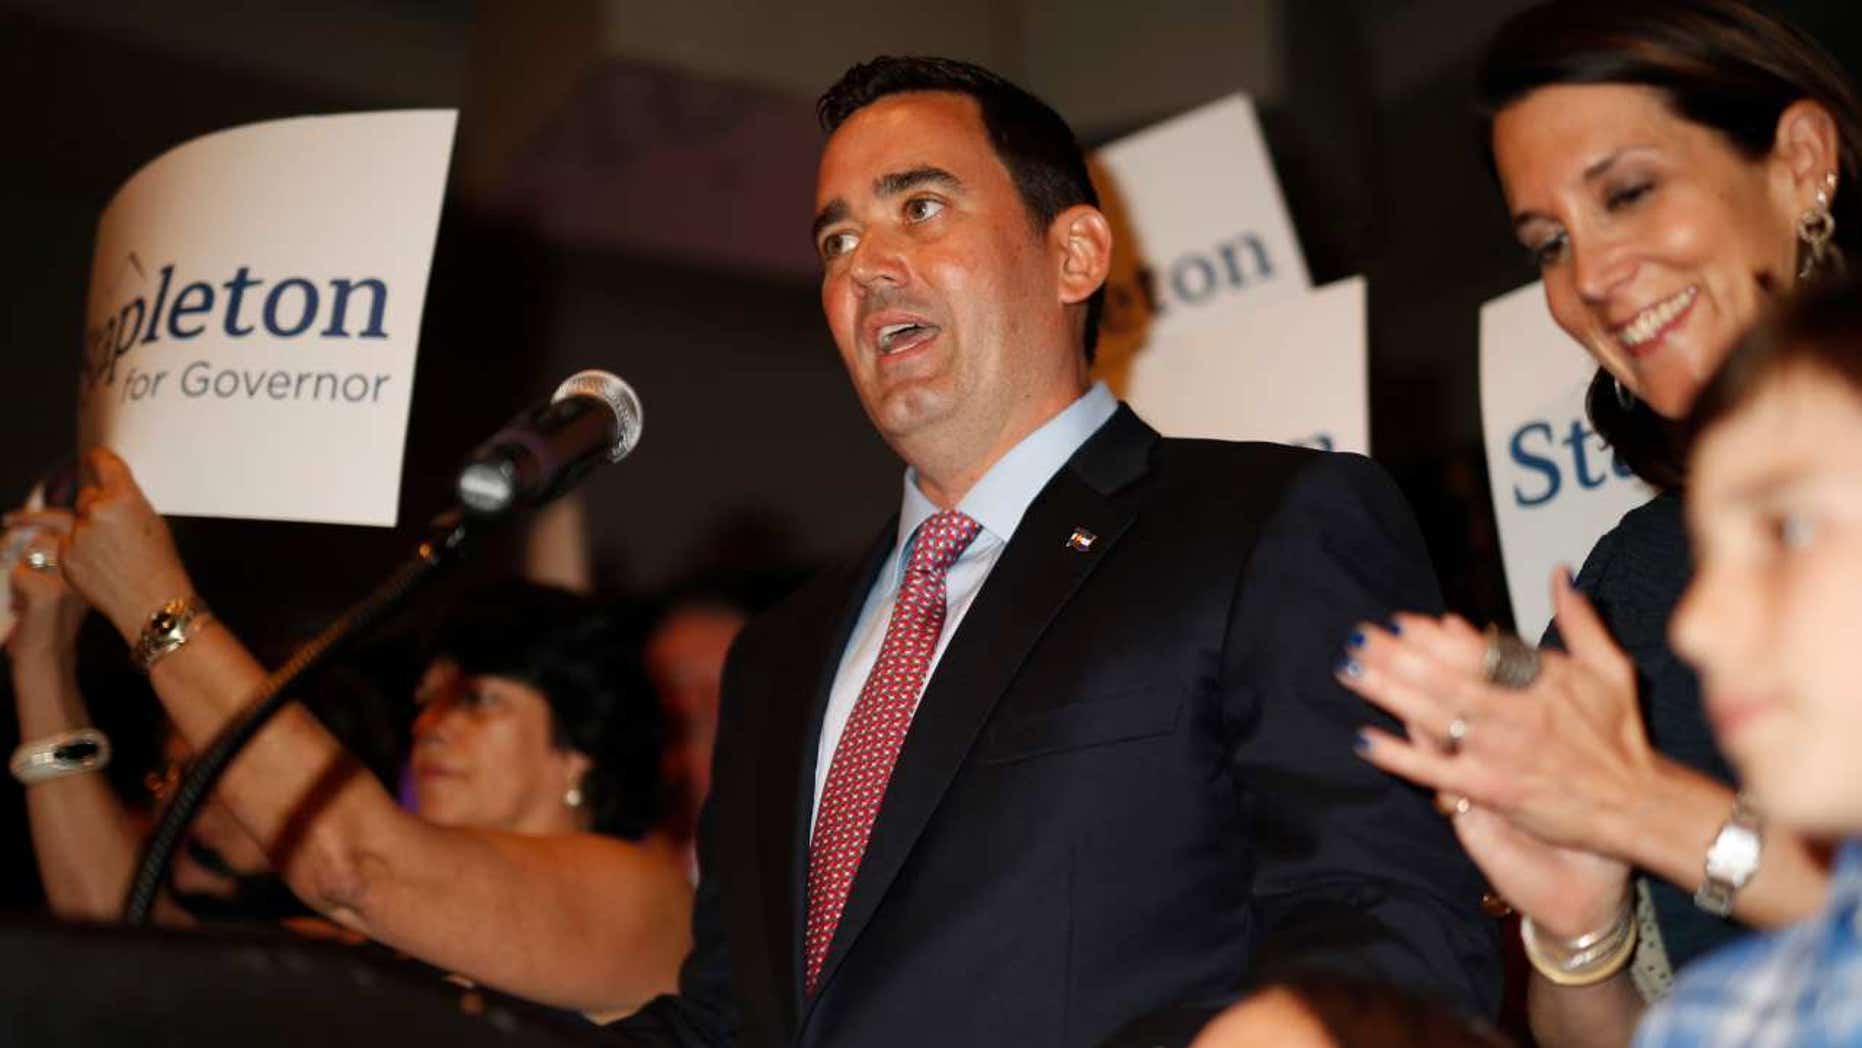 Walker Stapleton speaks after he won the Republican nomination to run for Colorado's governorship during an election night watch party in Greenwood Village, Colo., June 26, 2018.